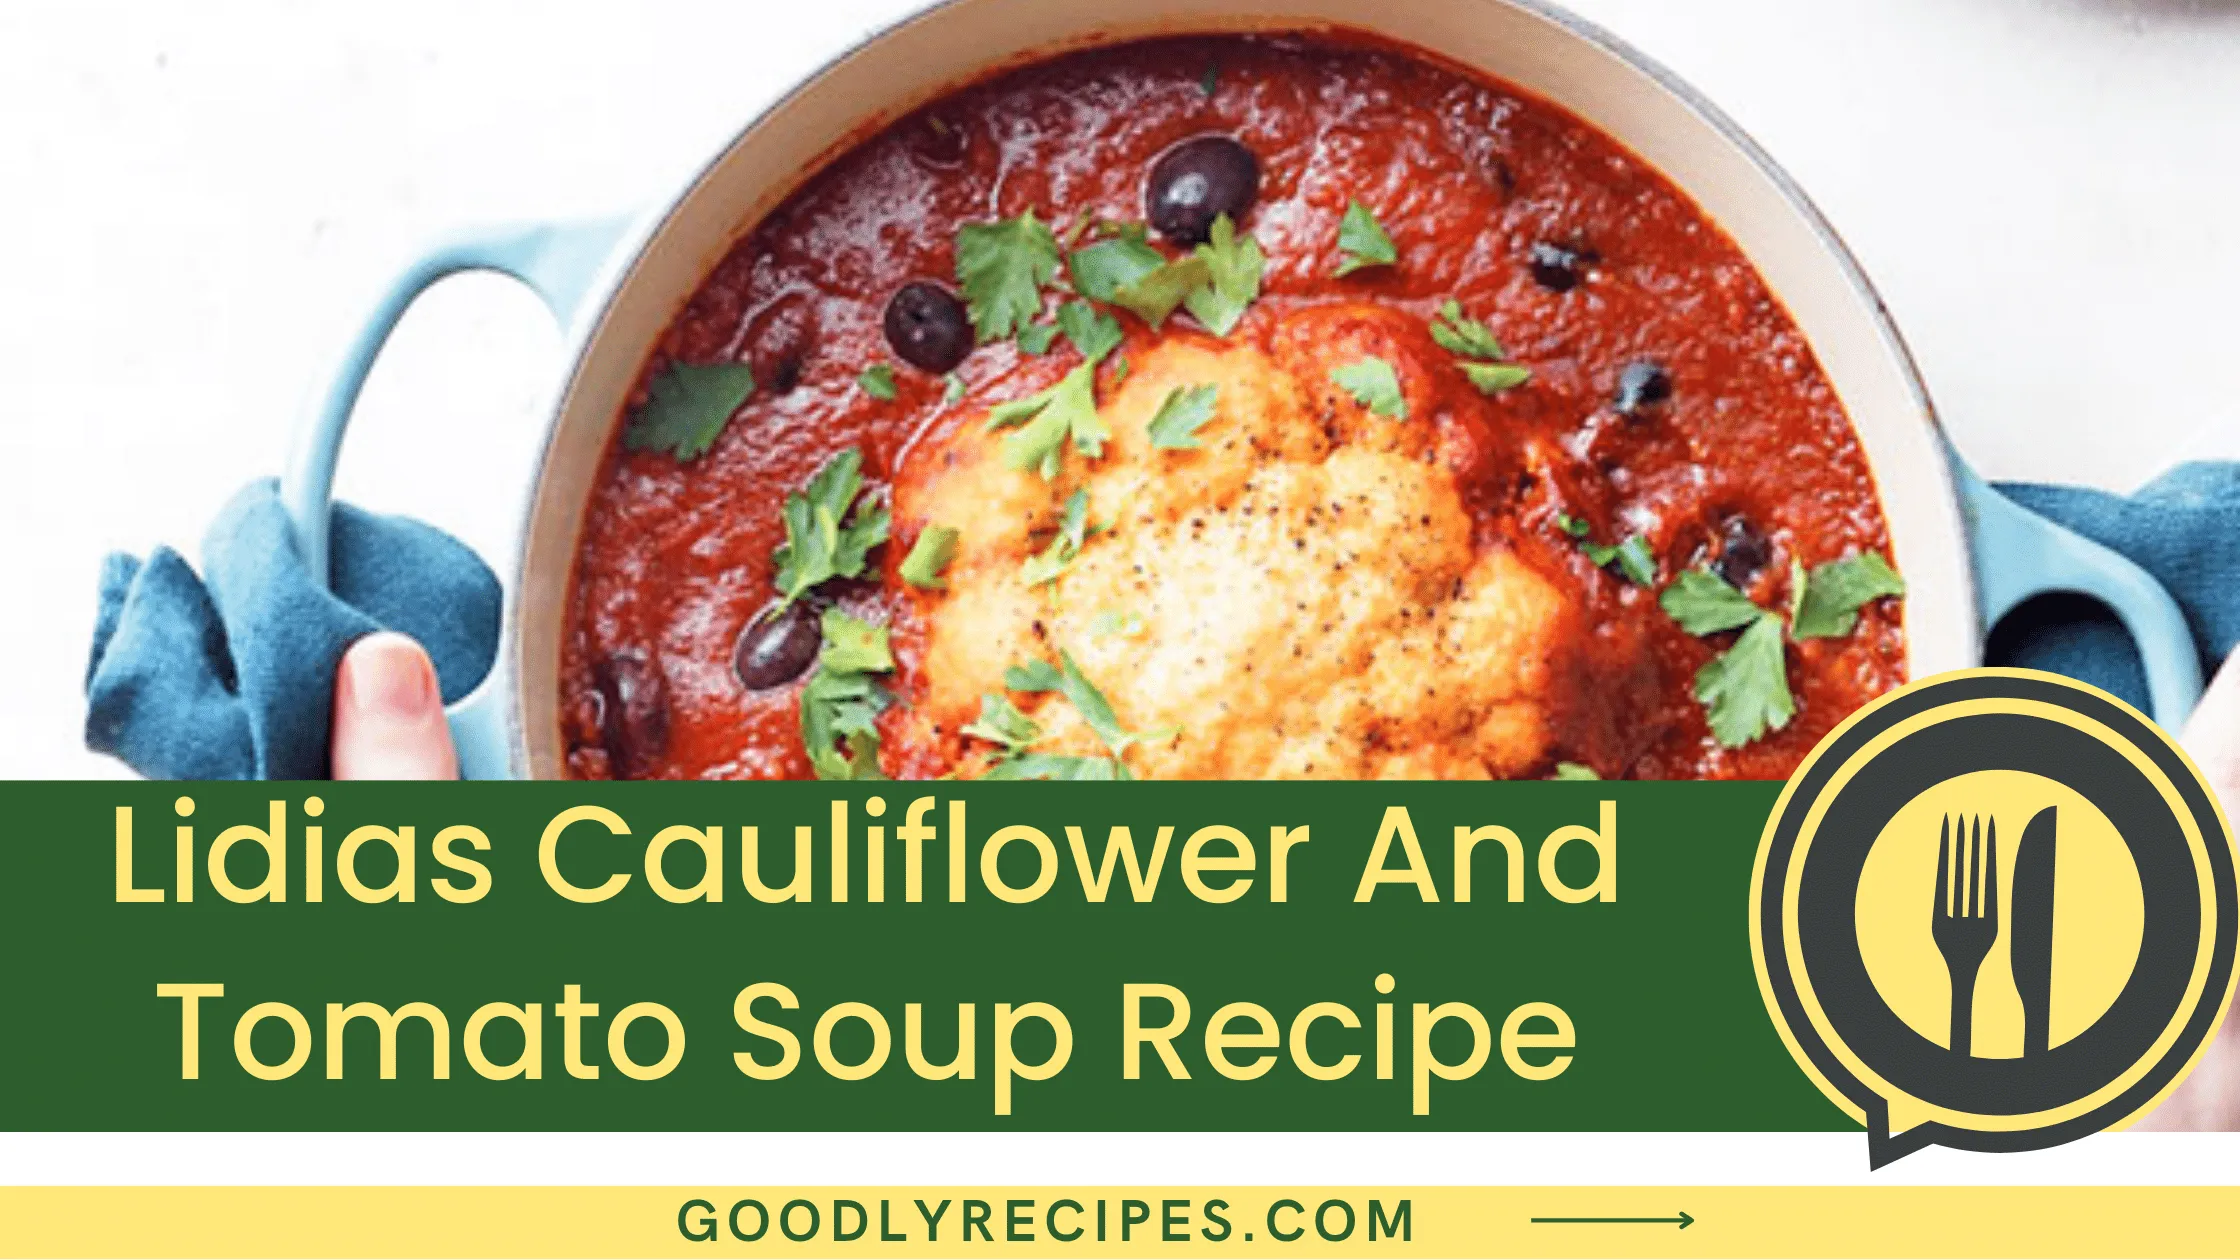 Lidia's Cauliflower And Tomato Soup Recipe - For Food Lovers